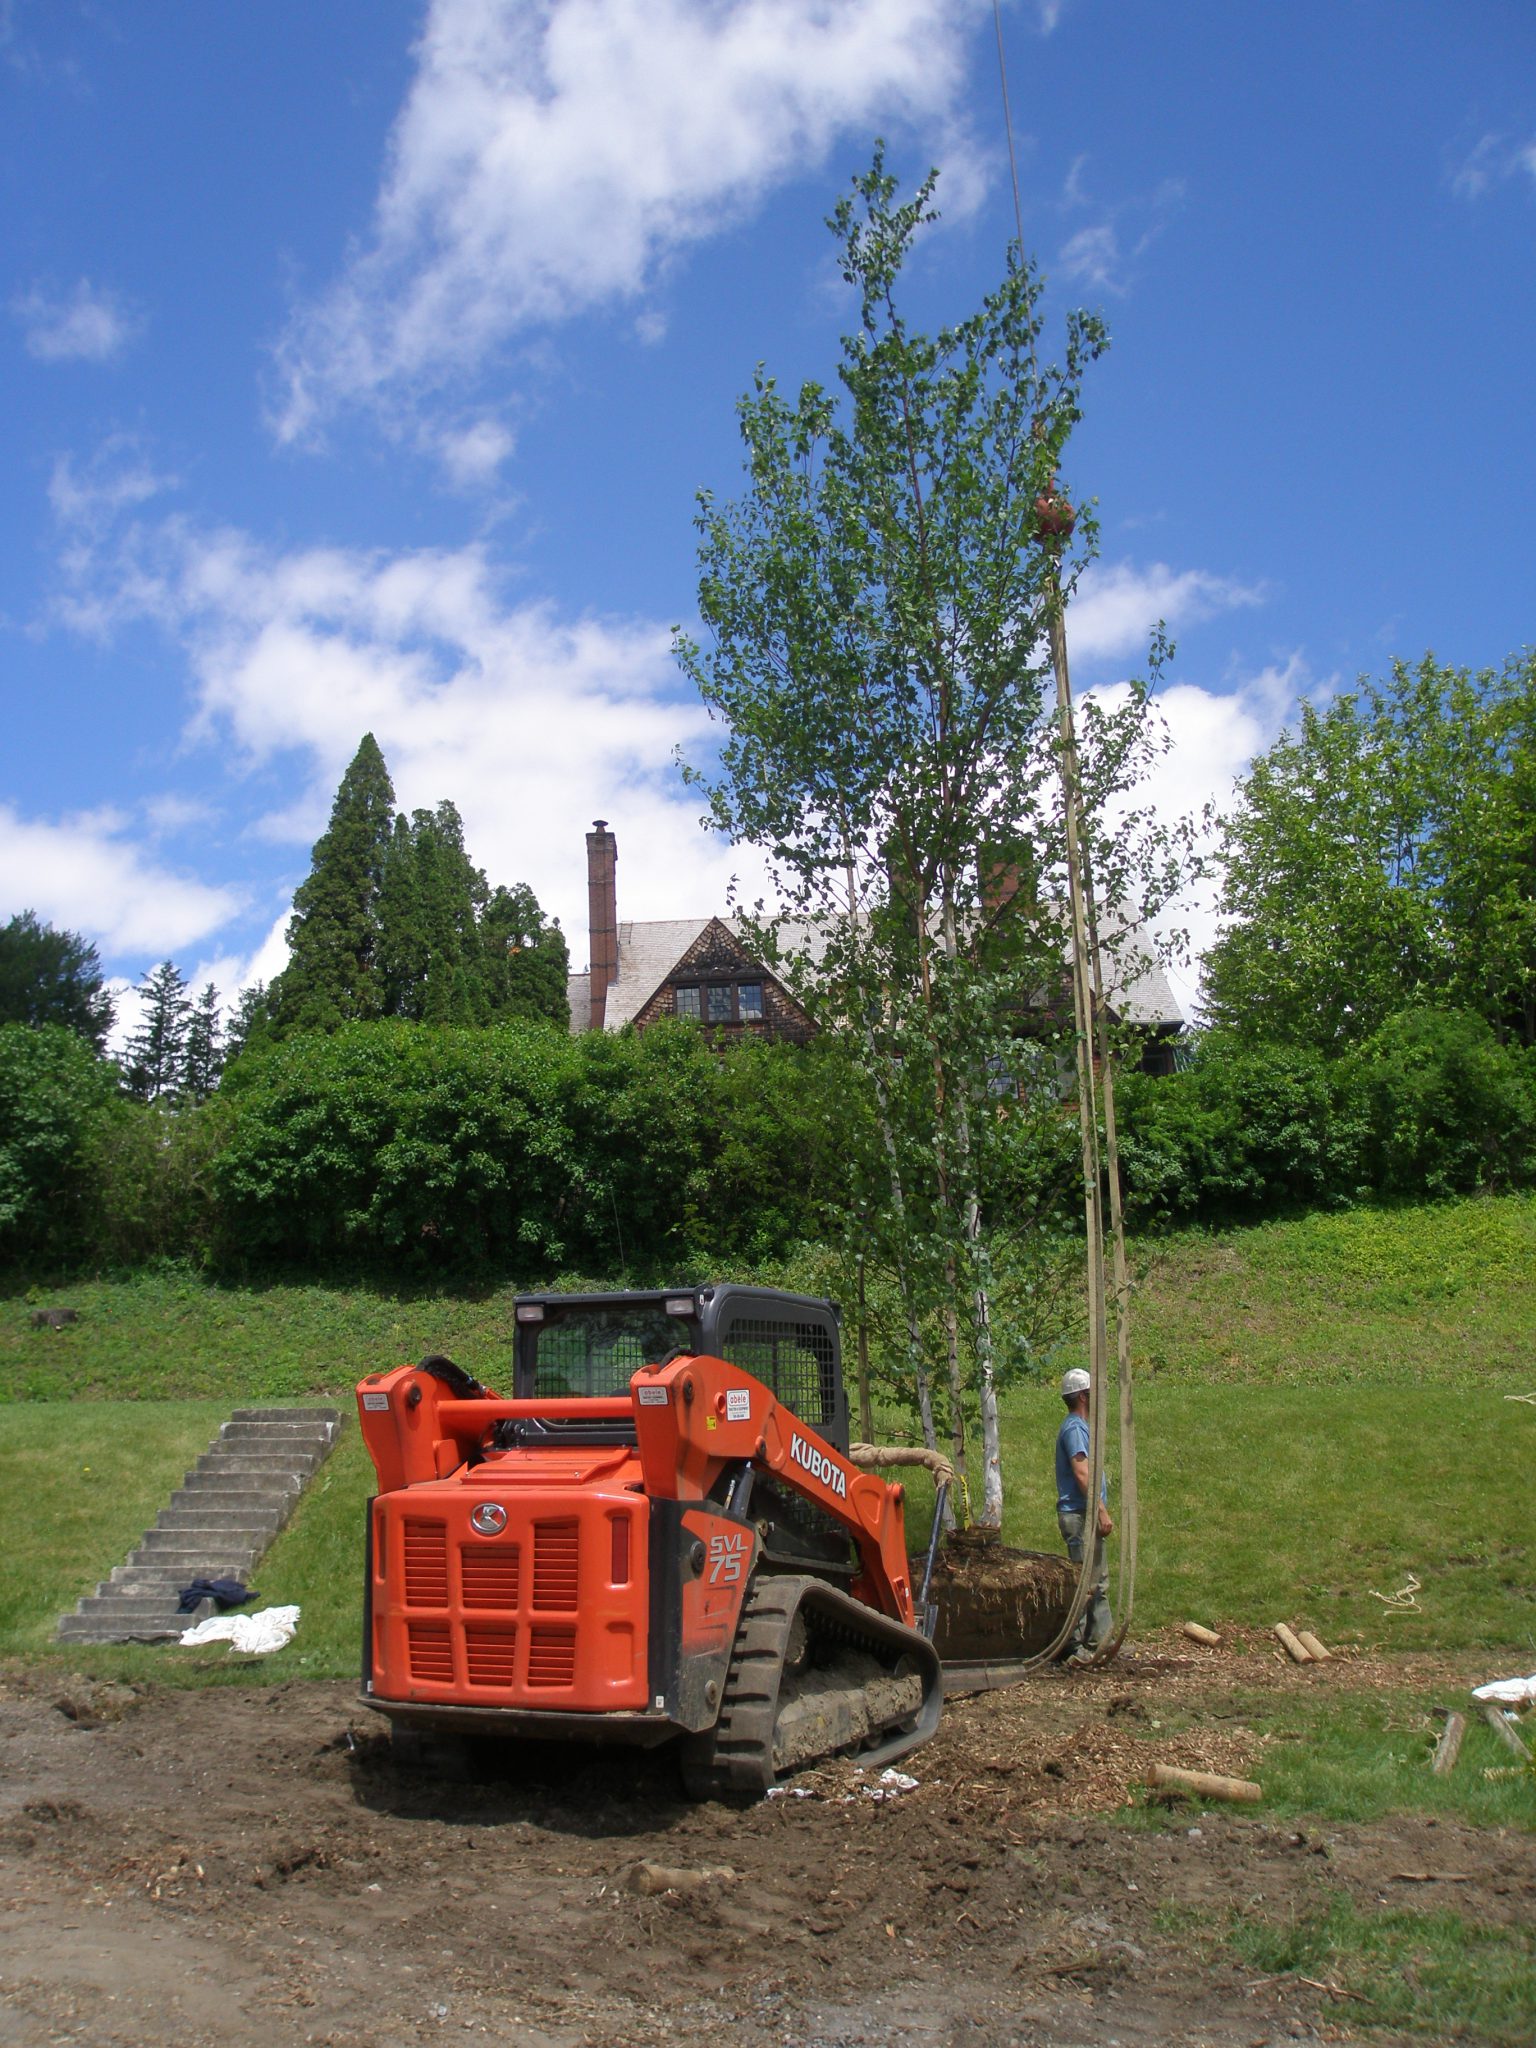 All of the old birch trees surrounding the Blue Steps have been removed, and on June 4th, the final batch of new trees were being hoisted into place.